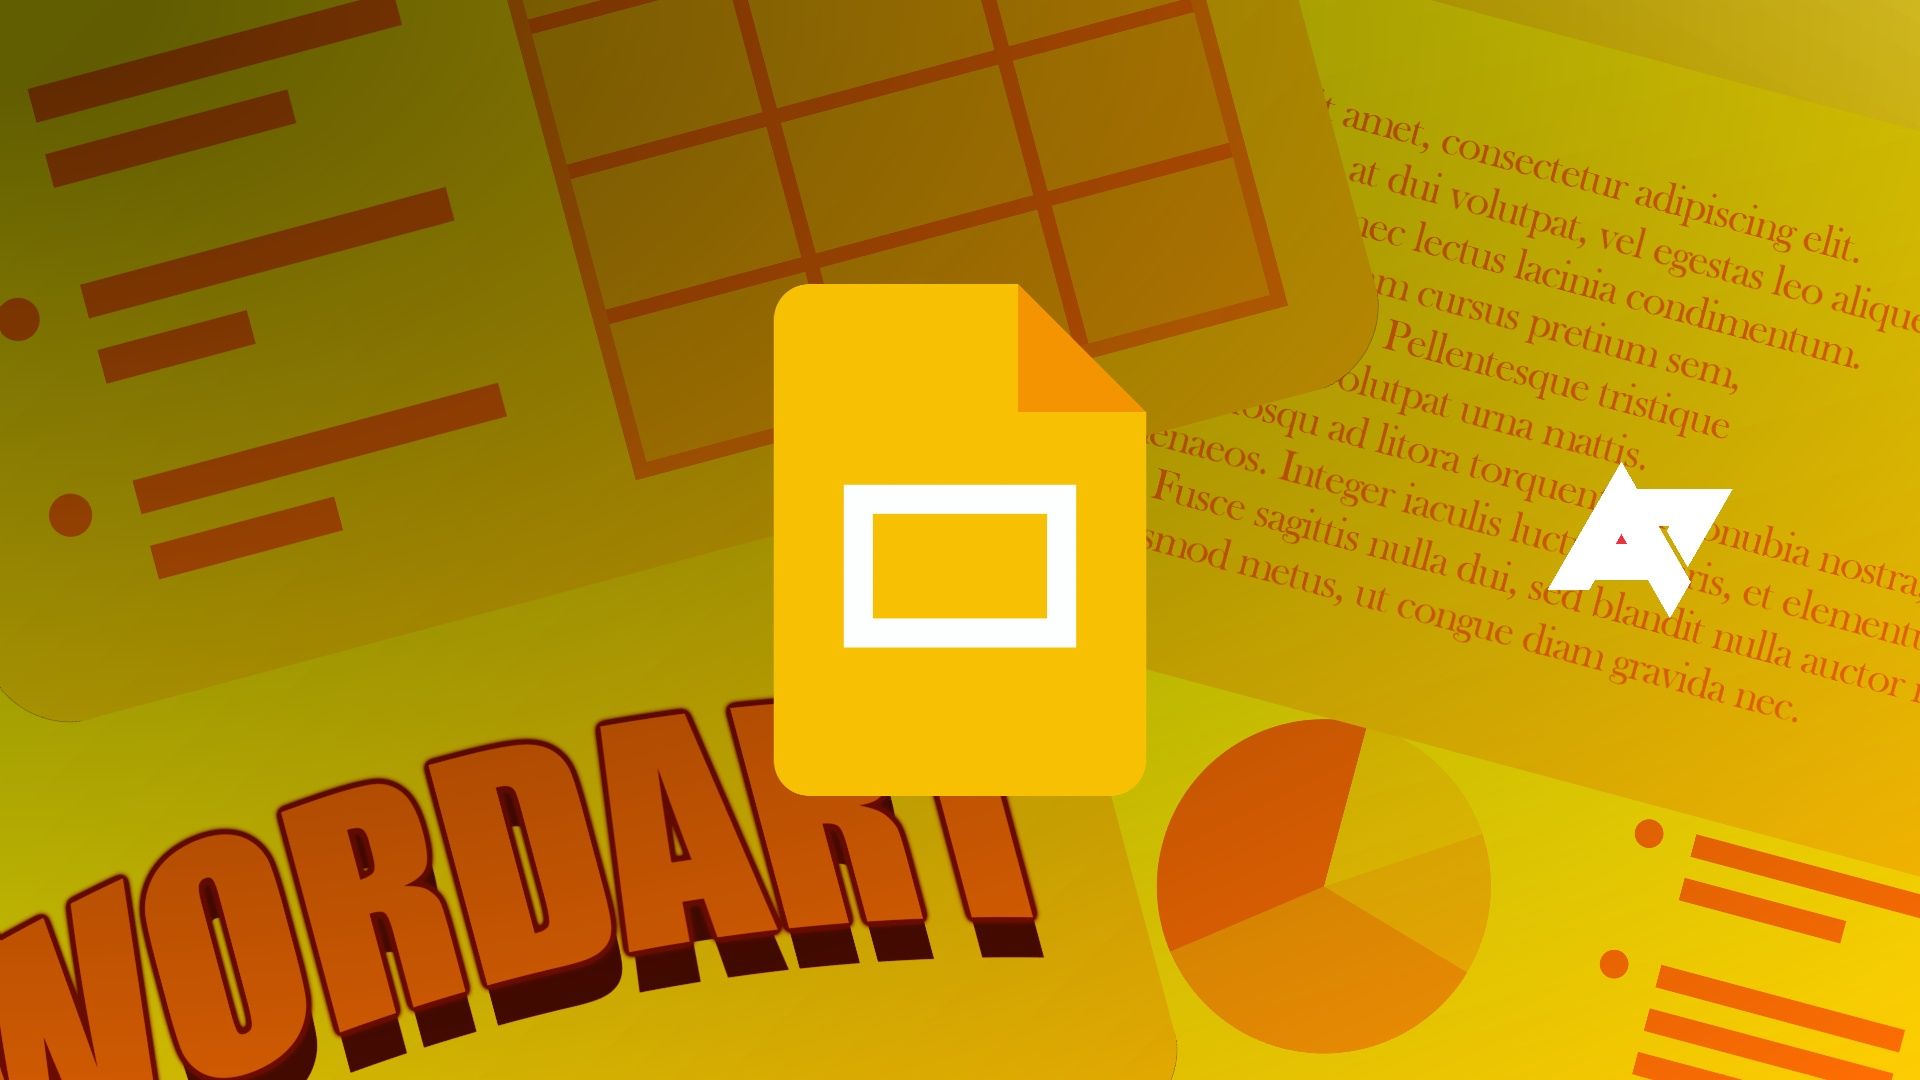 The Google Slides logo against a presentation done primarily in yellow and orange